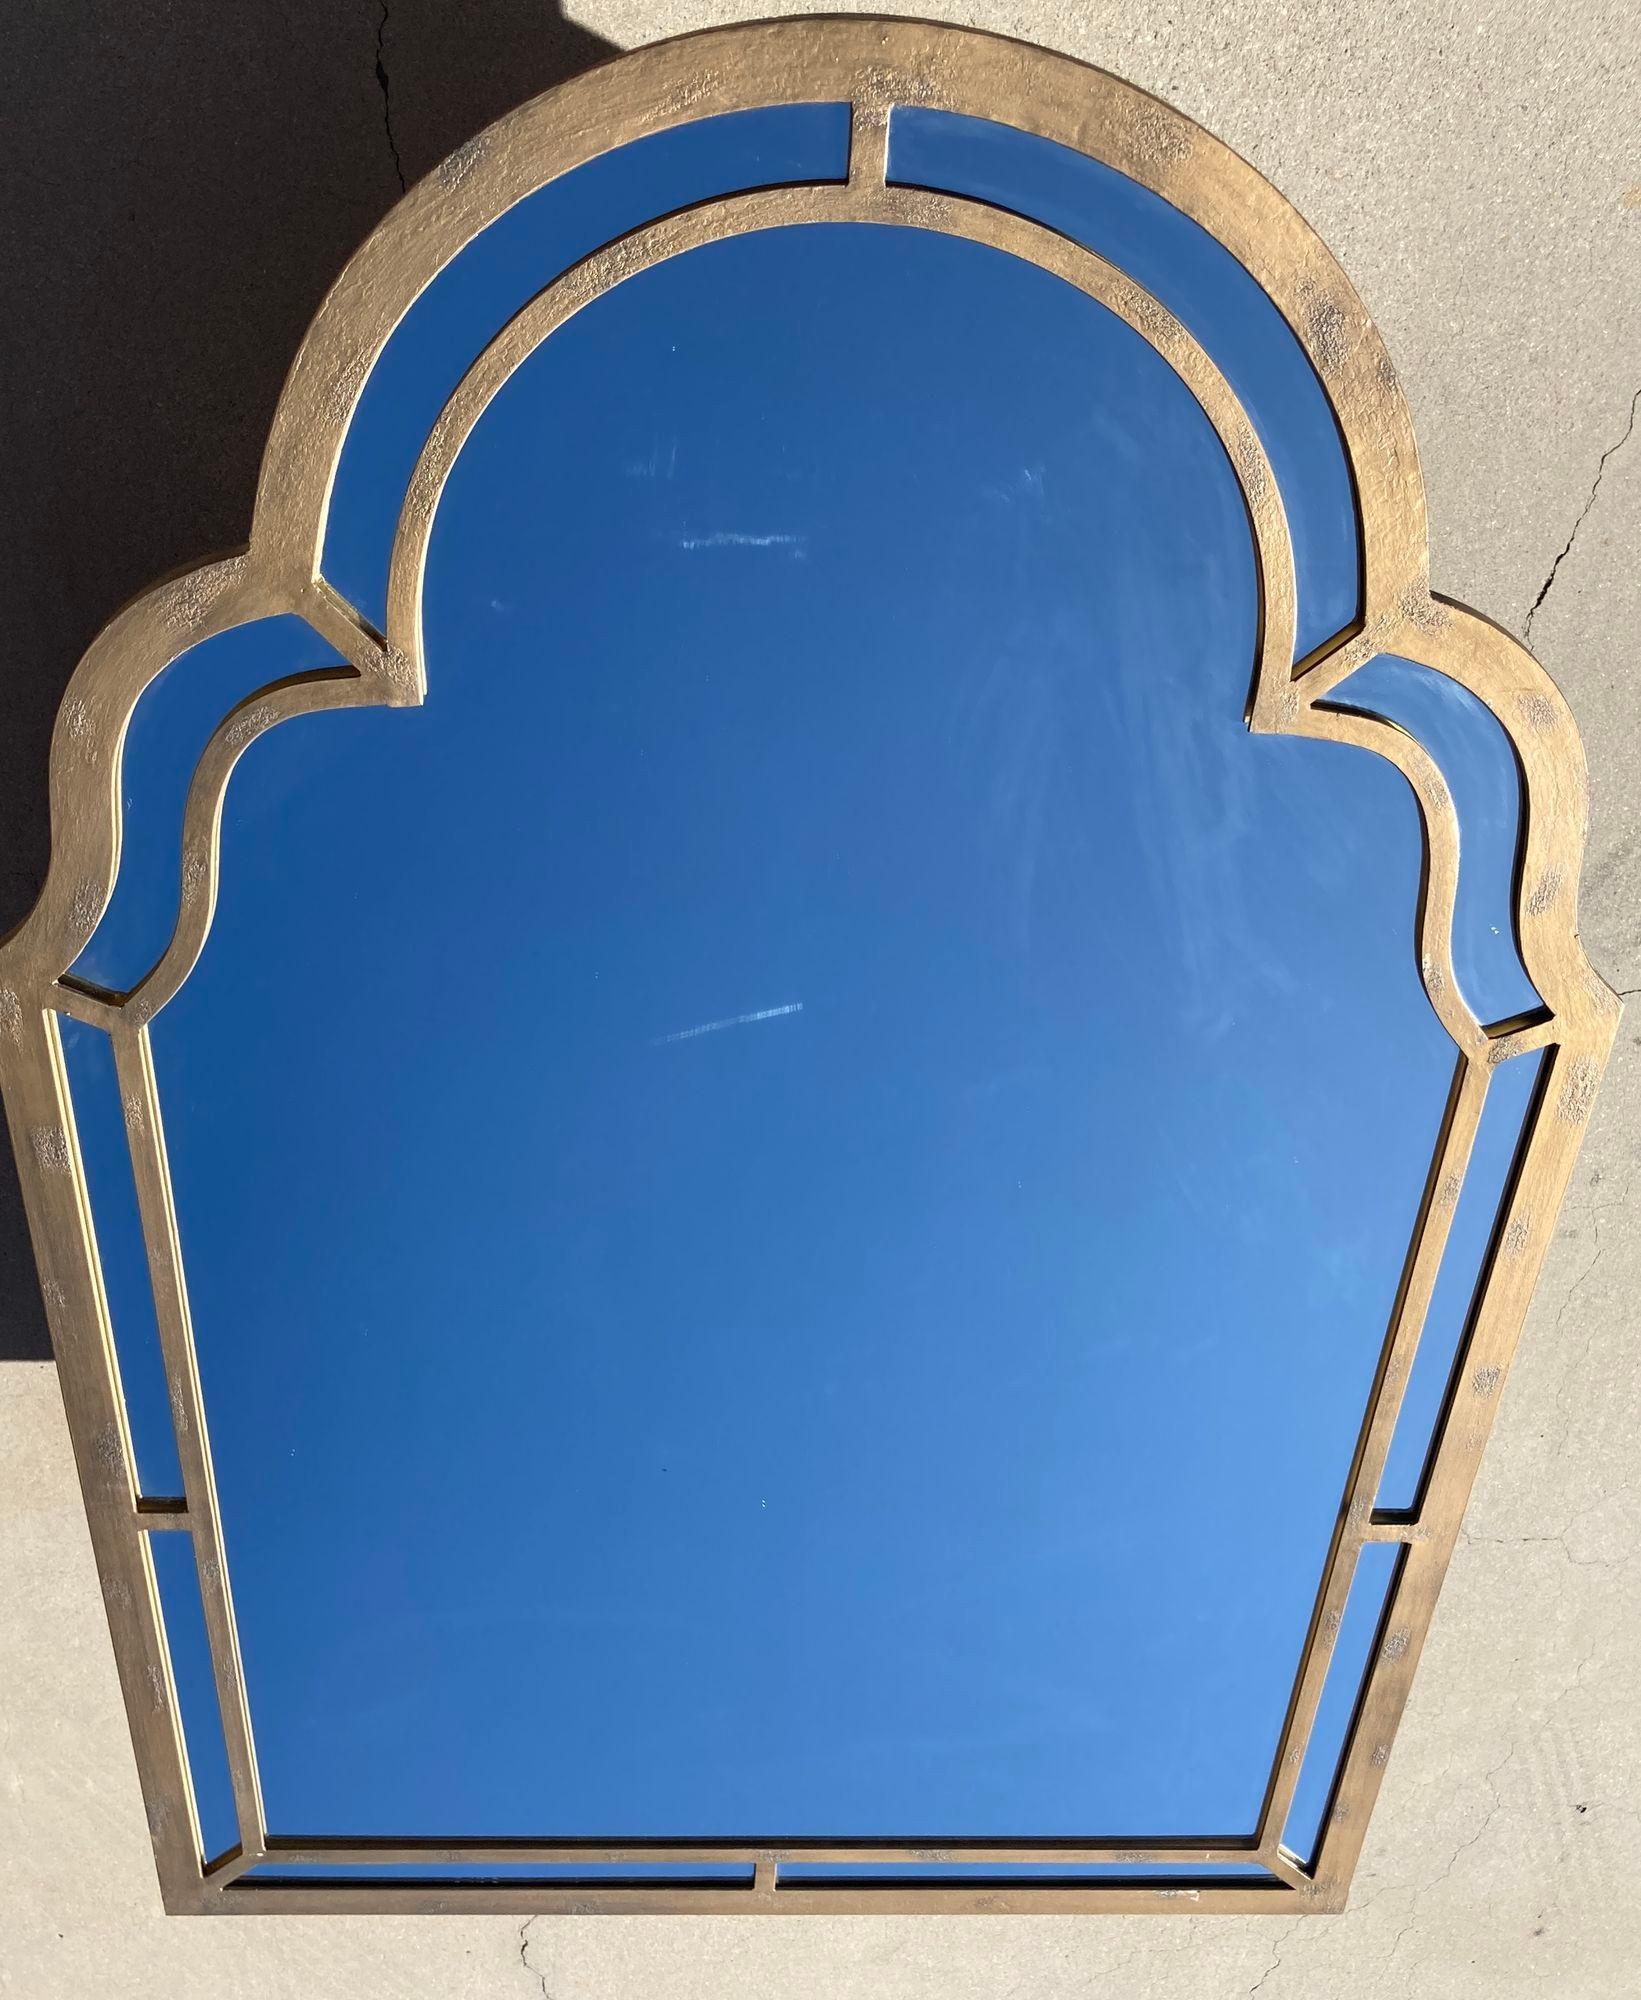 Very large substantial hand-crafted large solid wrought iron mirror.
Moorish arched mirror that will work with any Orientalist decor or traditional mediterranean or spanish colonial Santa Barbara California estate decor.
Large and heavy handcrafted